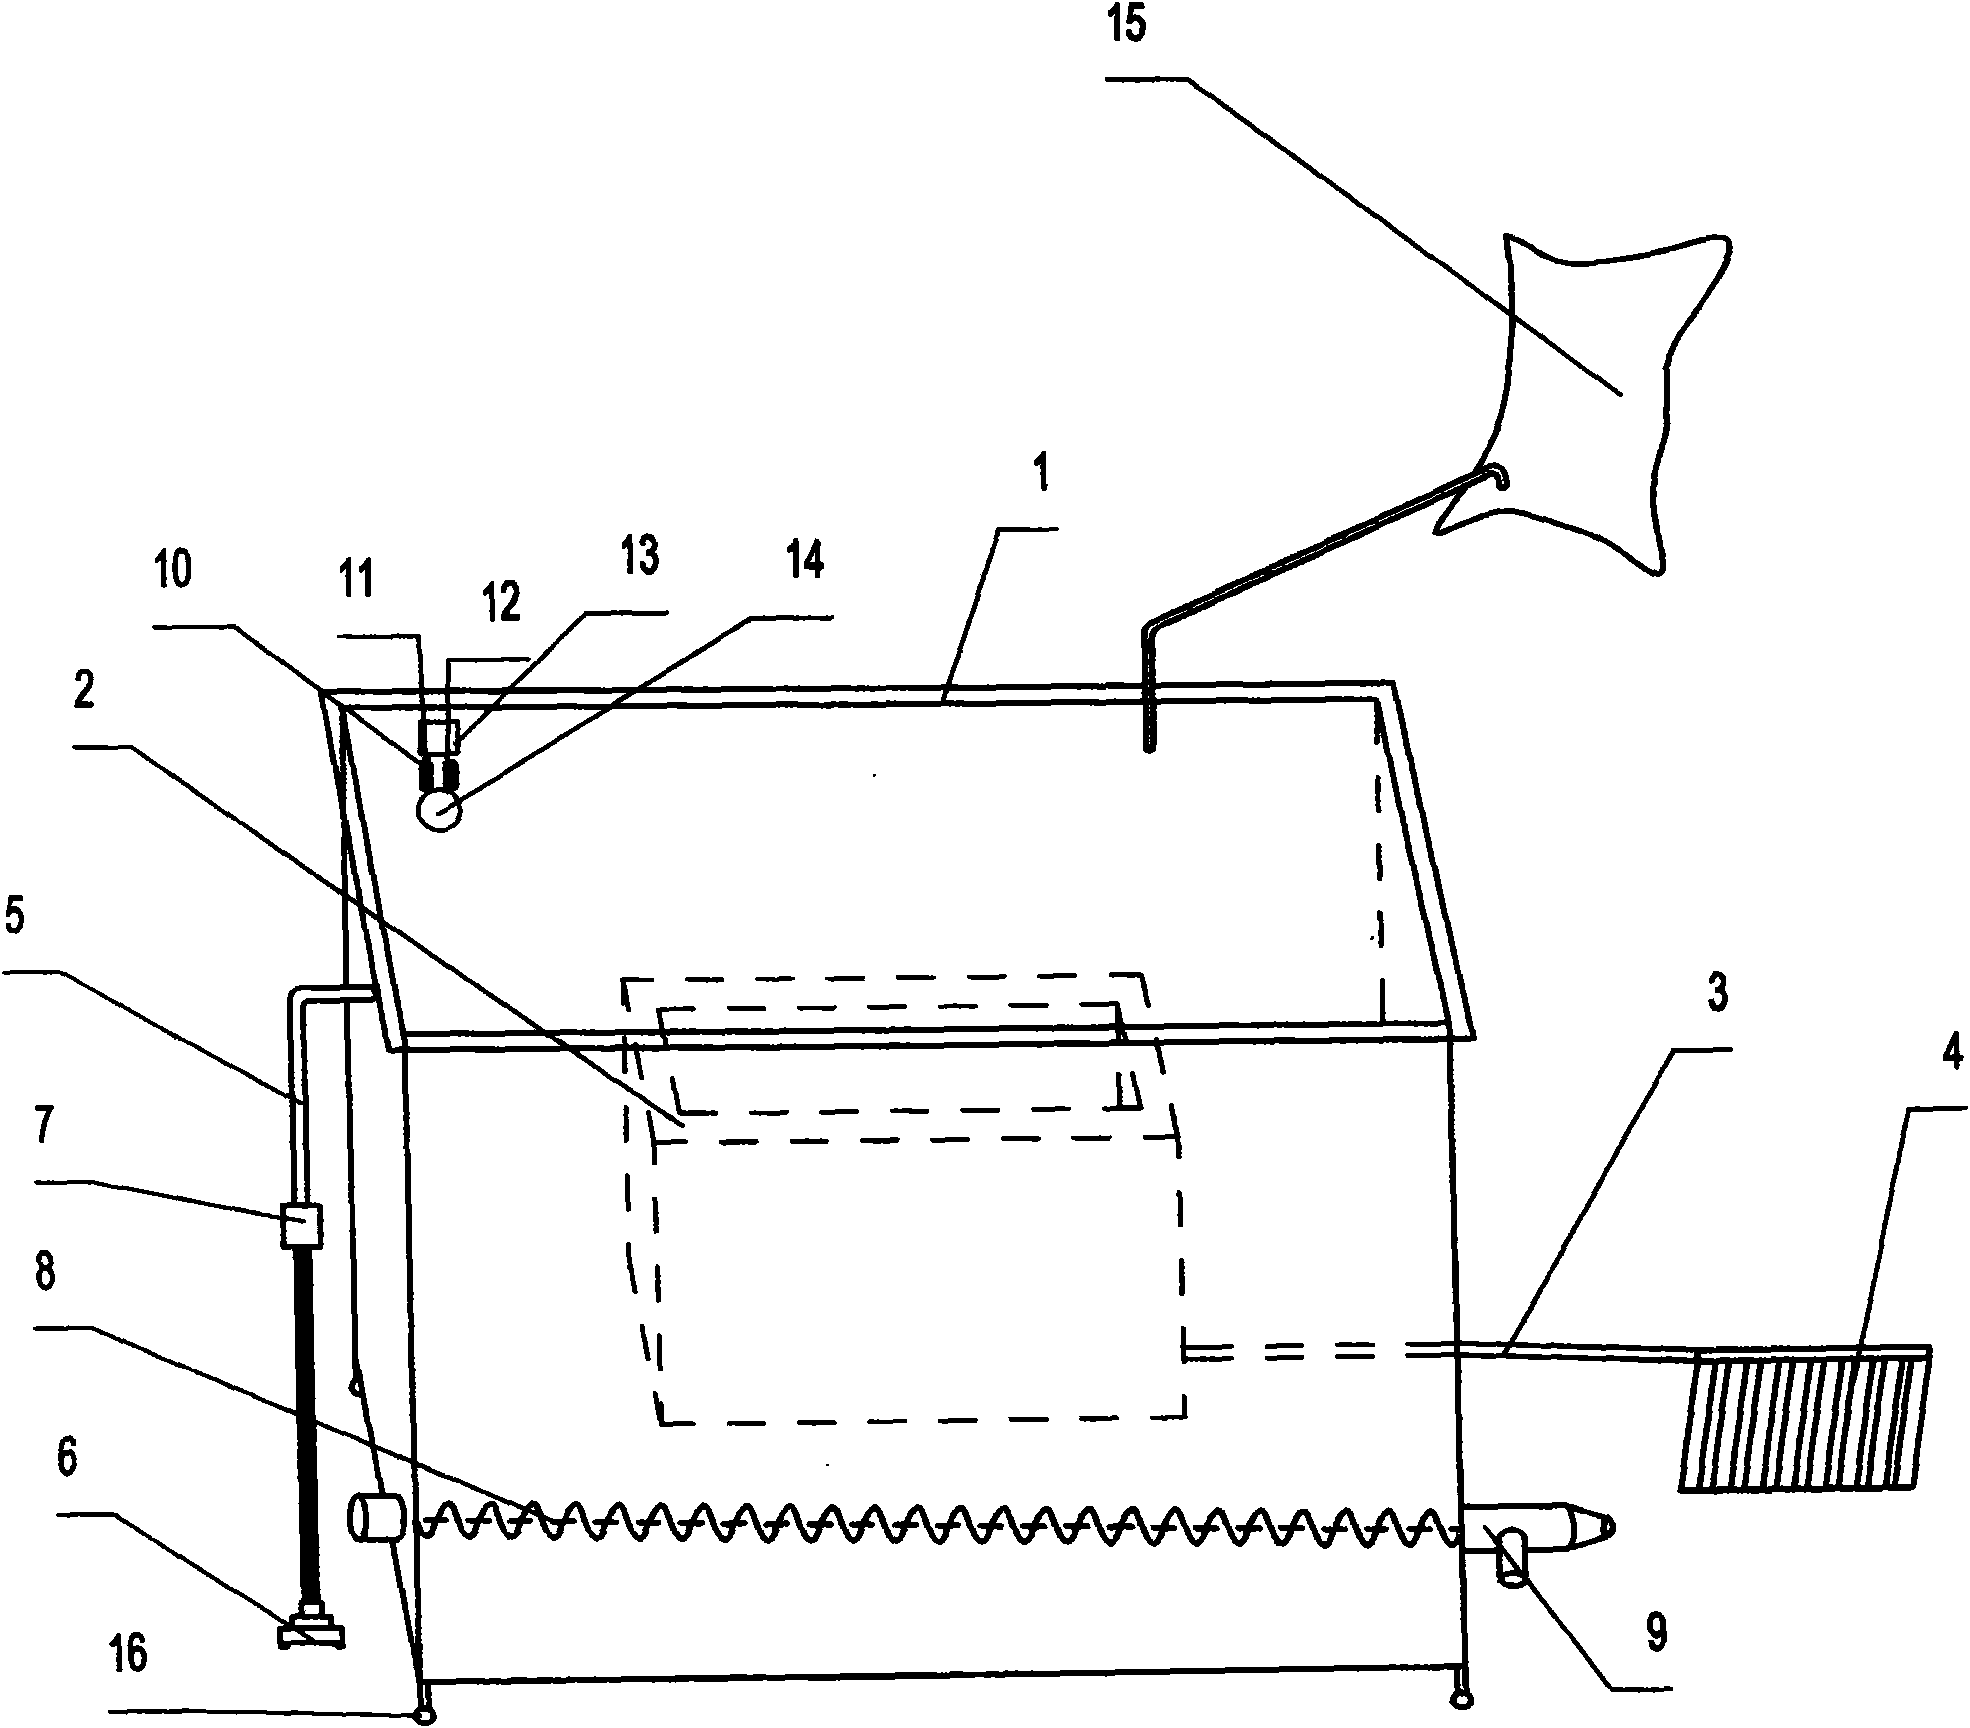 Multi-function high-efficiency livestock and poultry excrement treating device